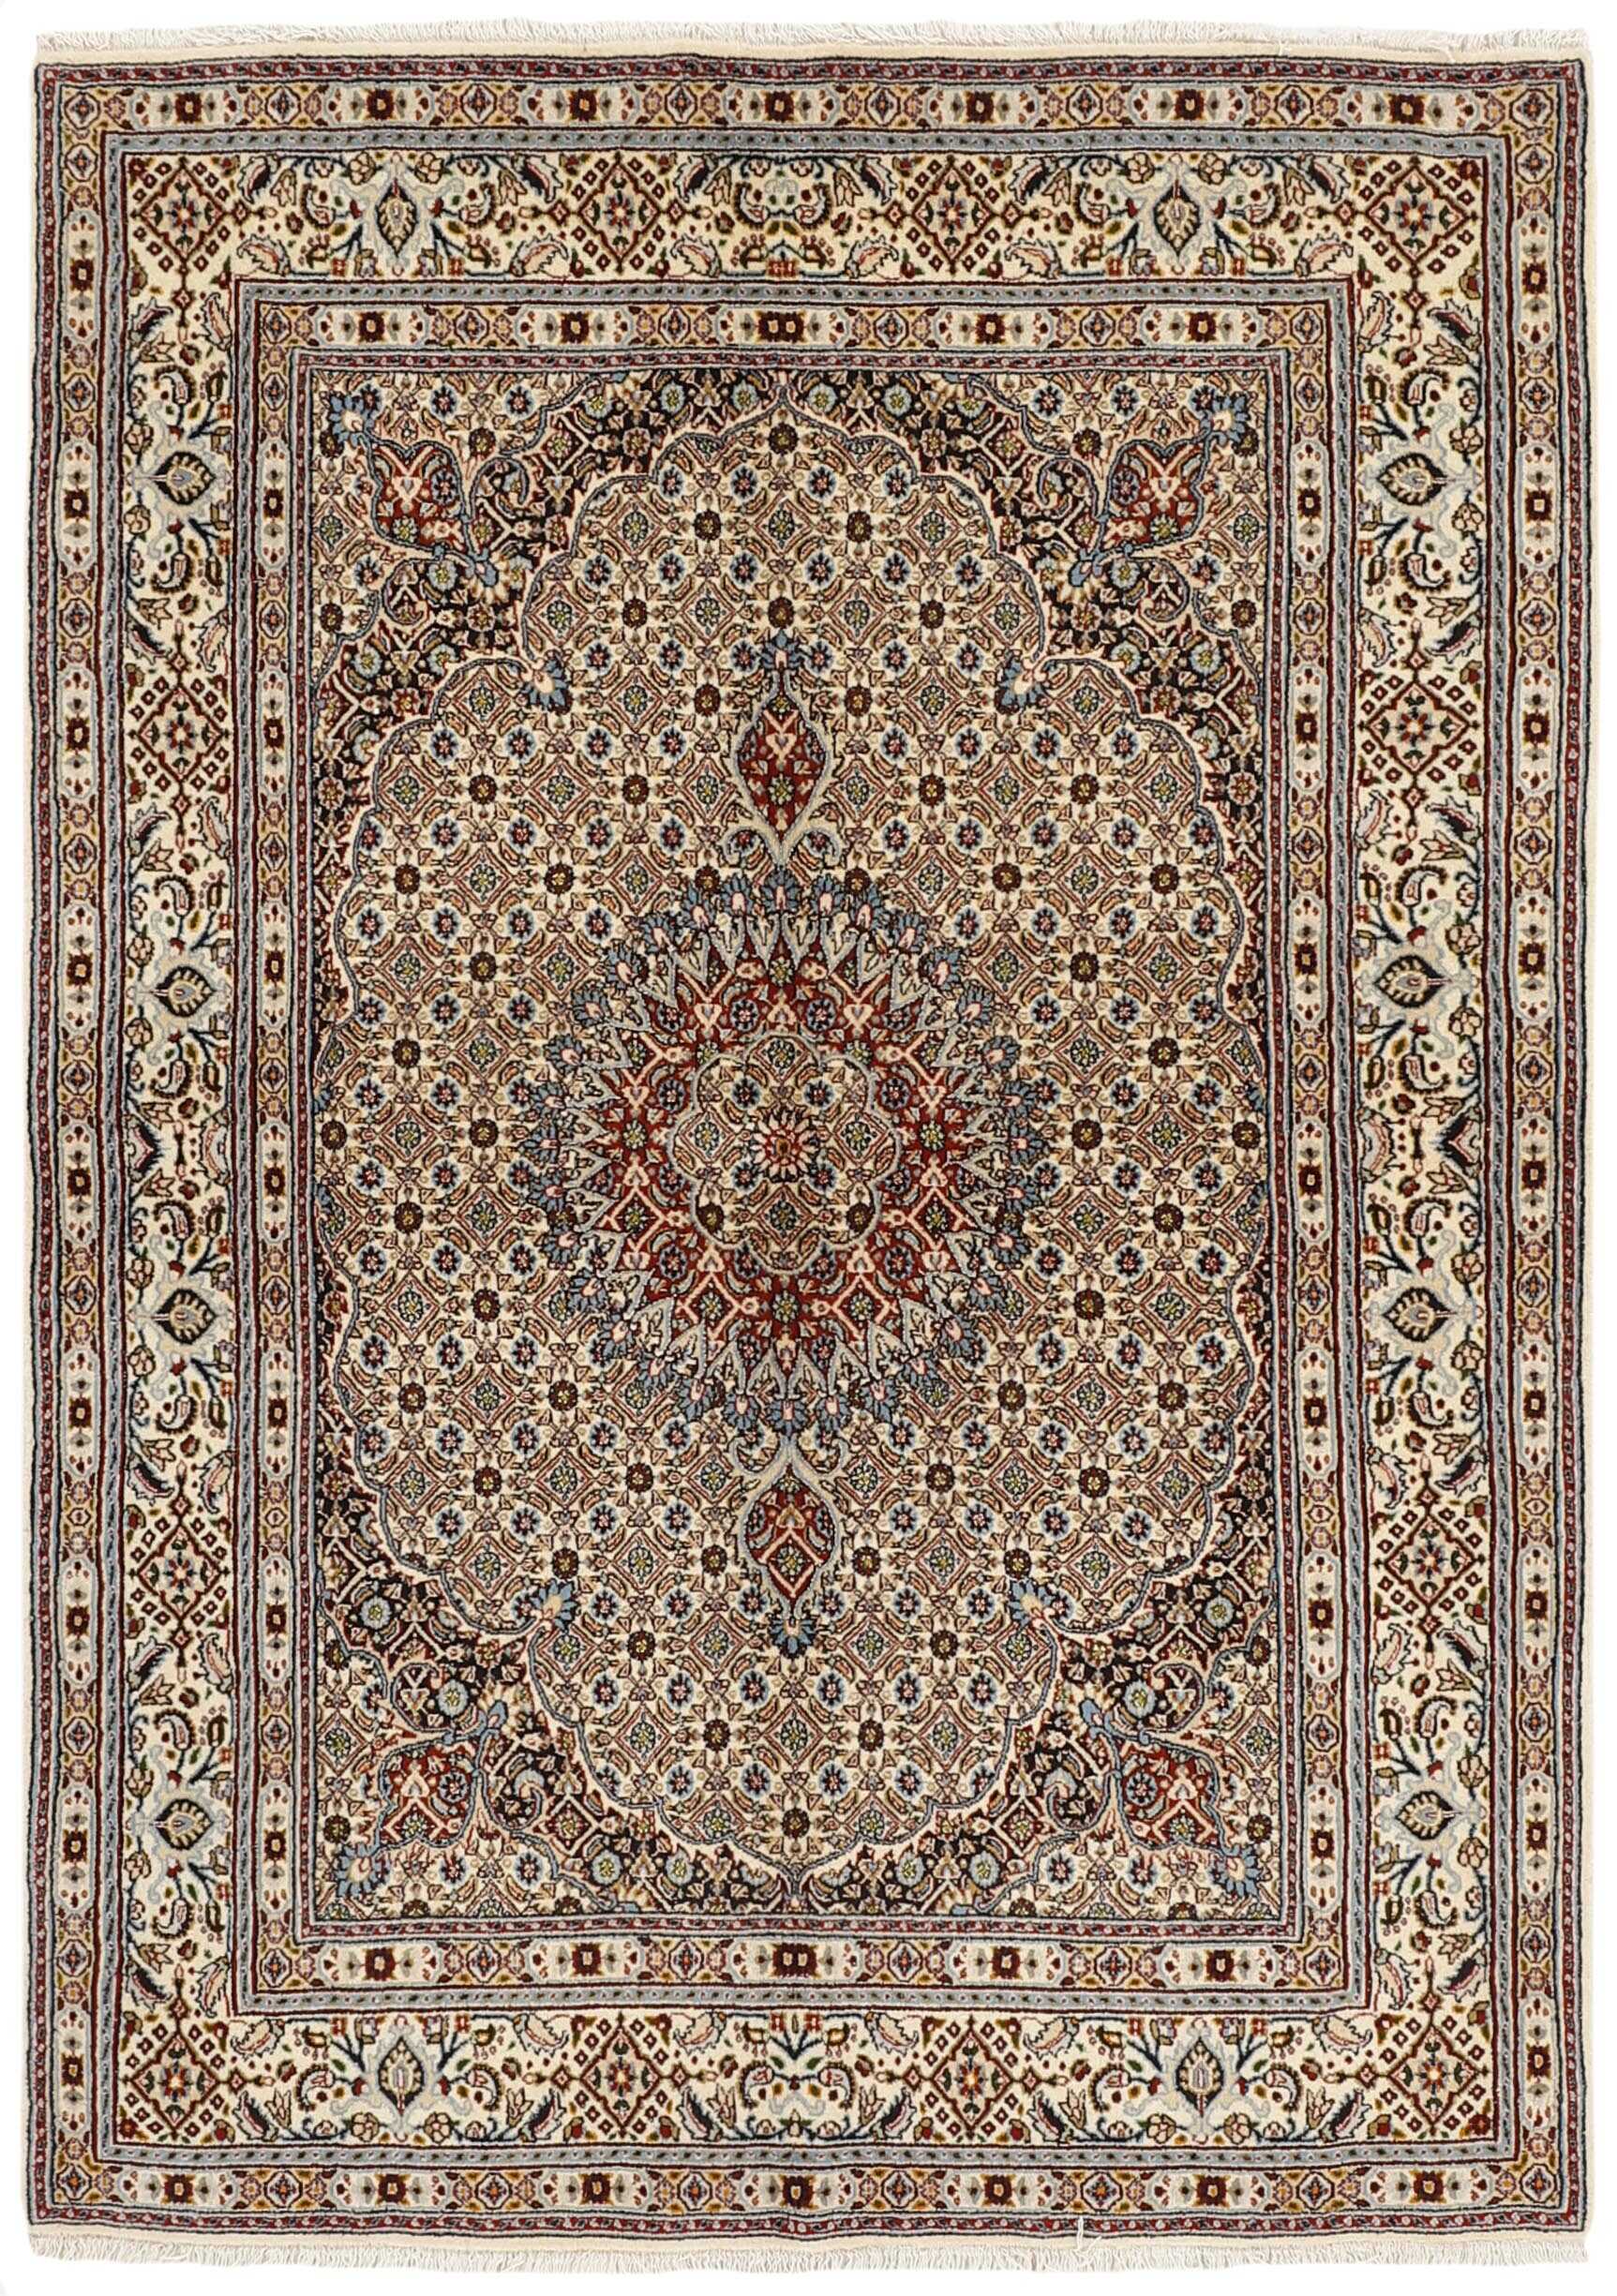 authentic persian rug with traditional floral pattern in cream, blue and red